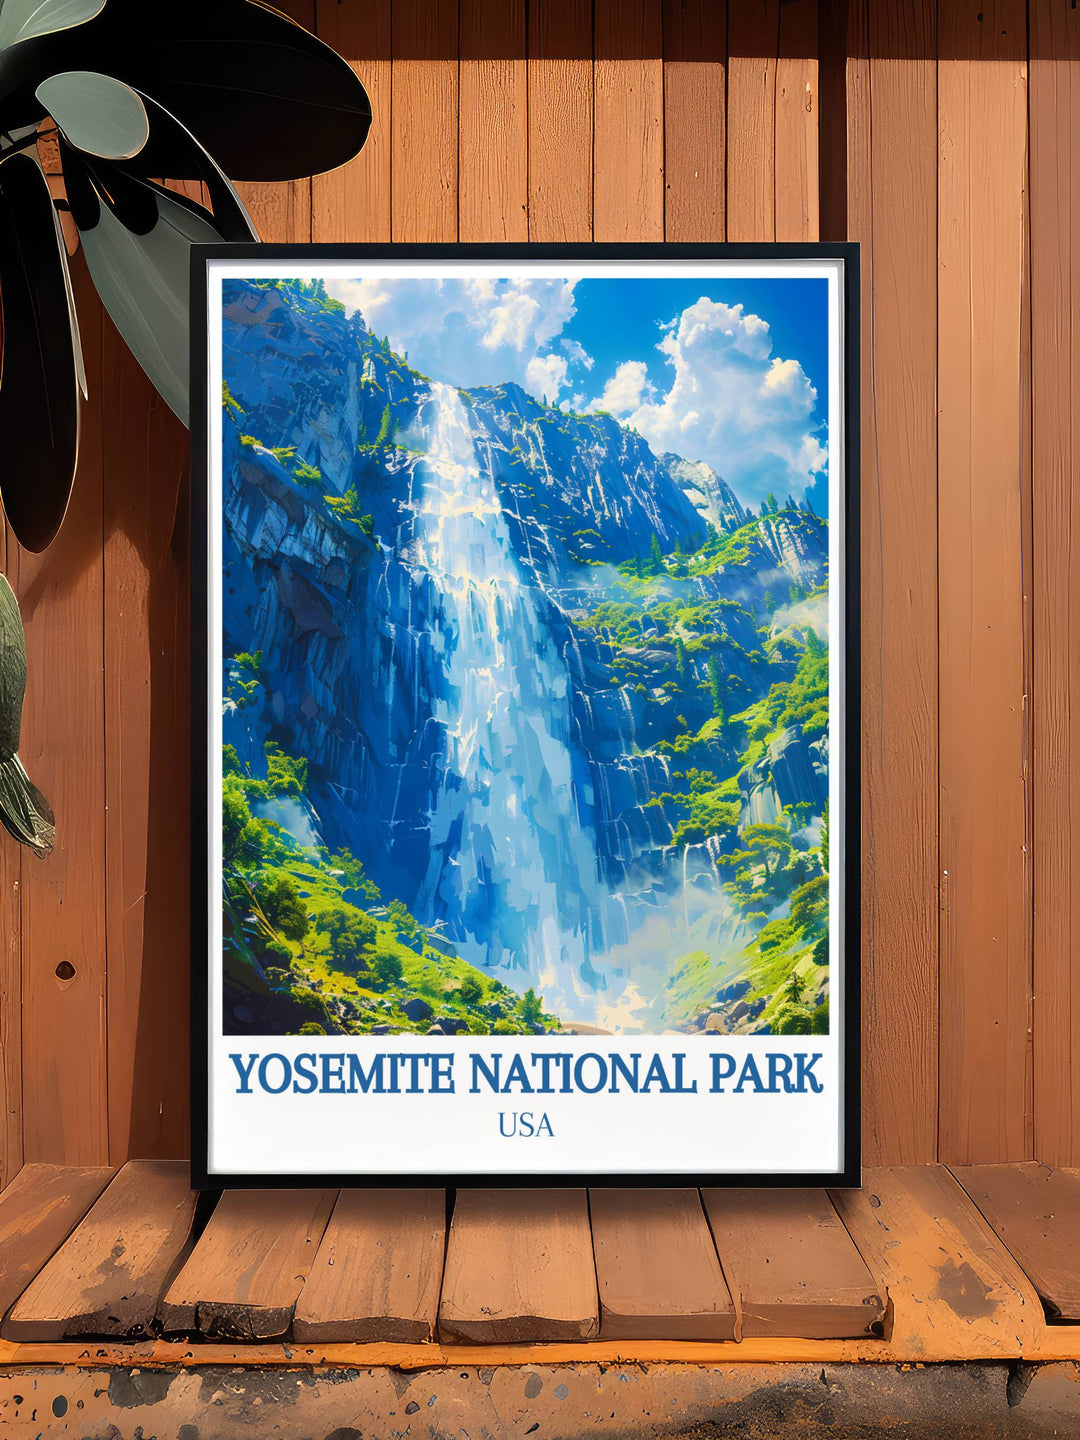 Vibrant Yosemite National Park artwork depicting the iconic El Capitan and Half Dome, bringing the beauty of this natural wonder into your living space with stunning detail.